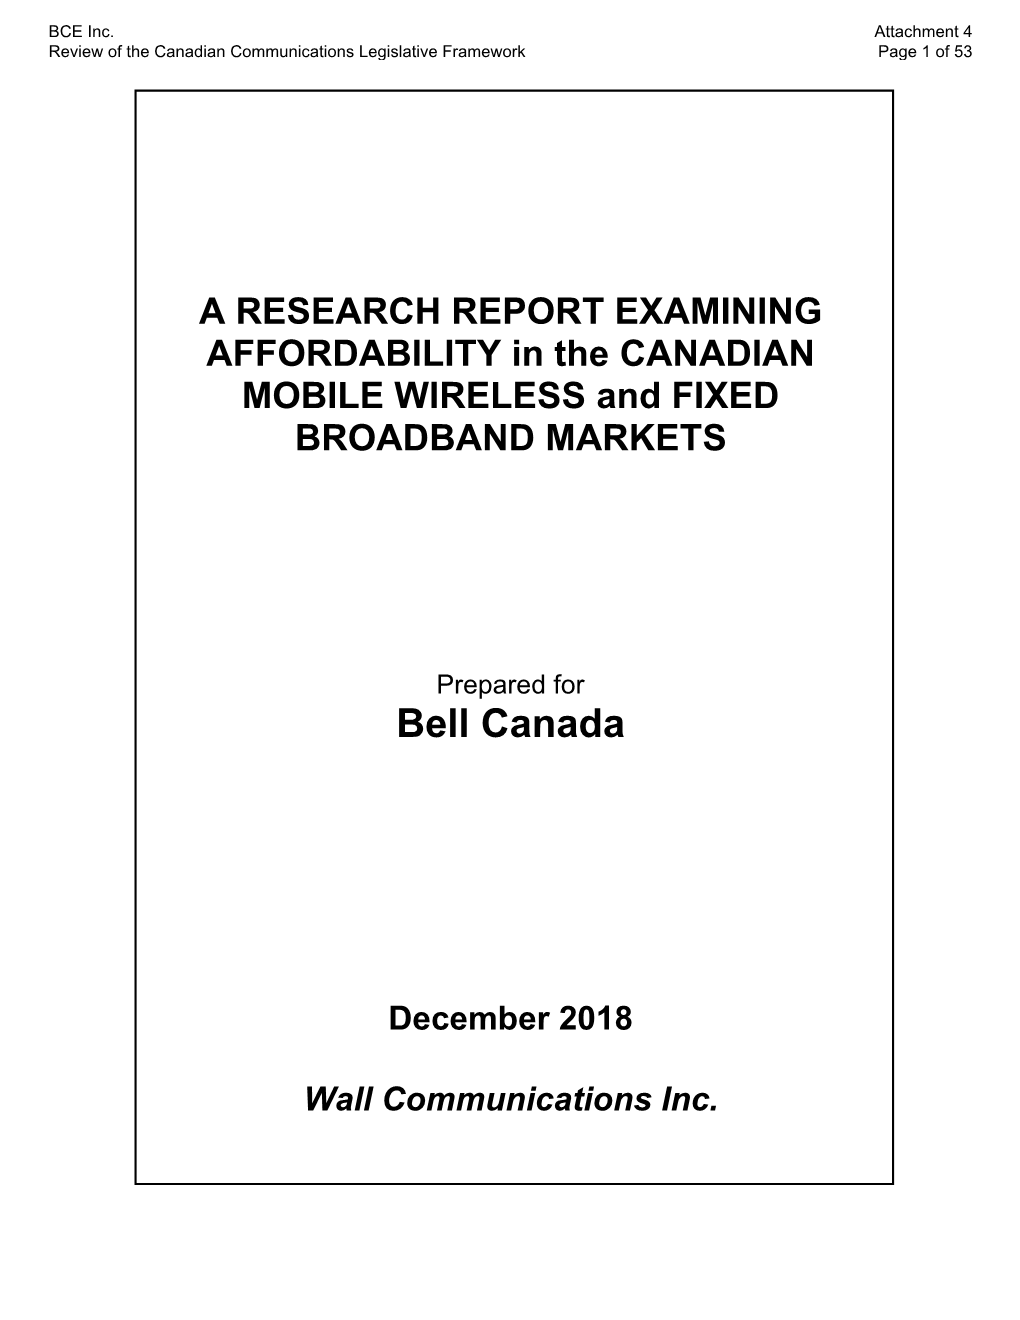 BCE Inc.: a Research Report Examining Affordability in the Canadian Mobile Wireless and Fixed Broadband Markets